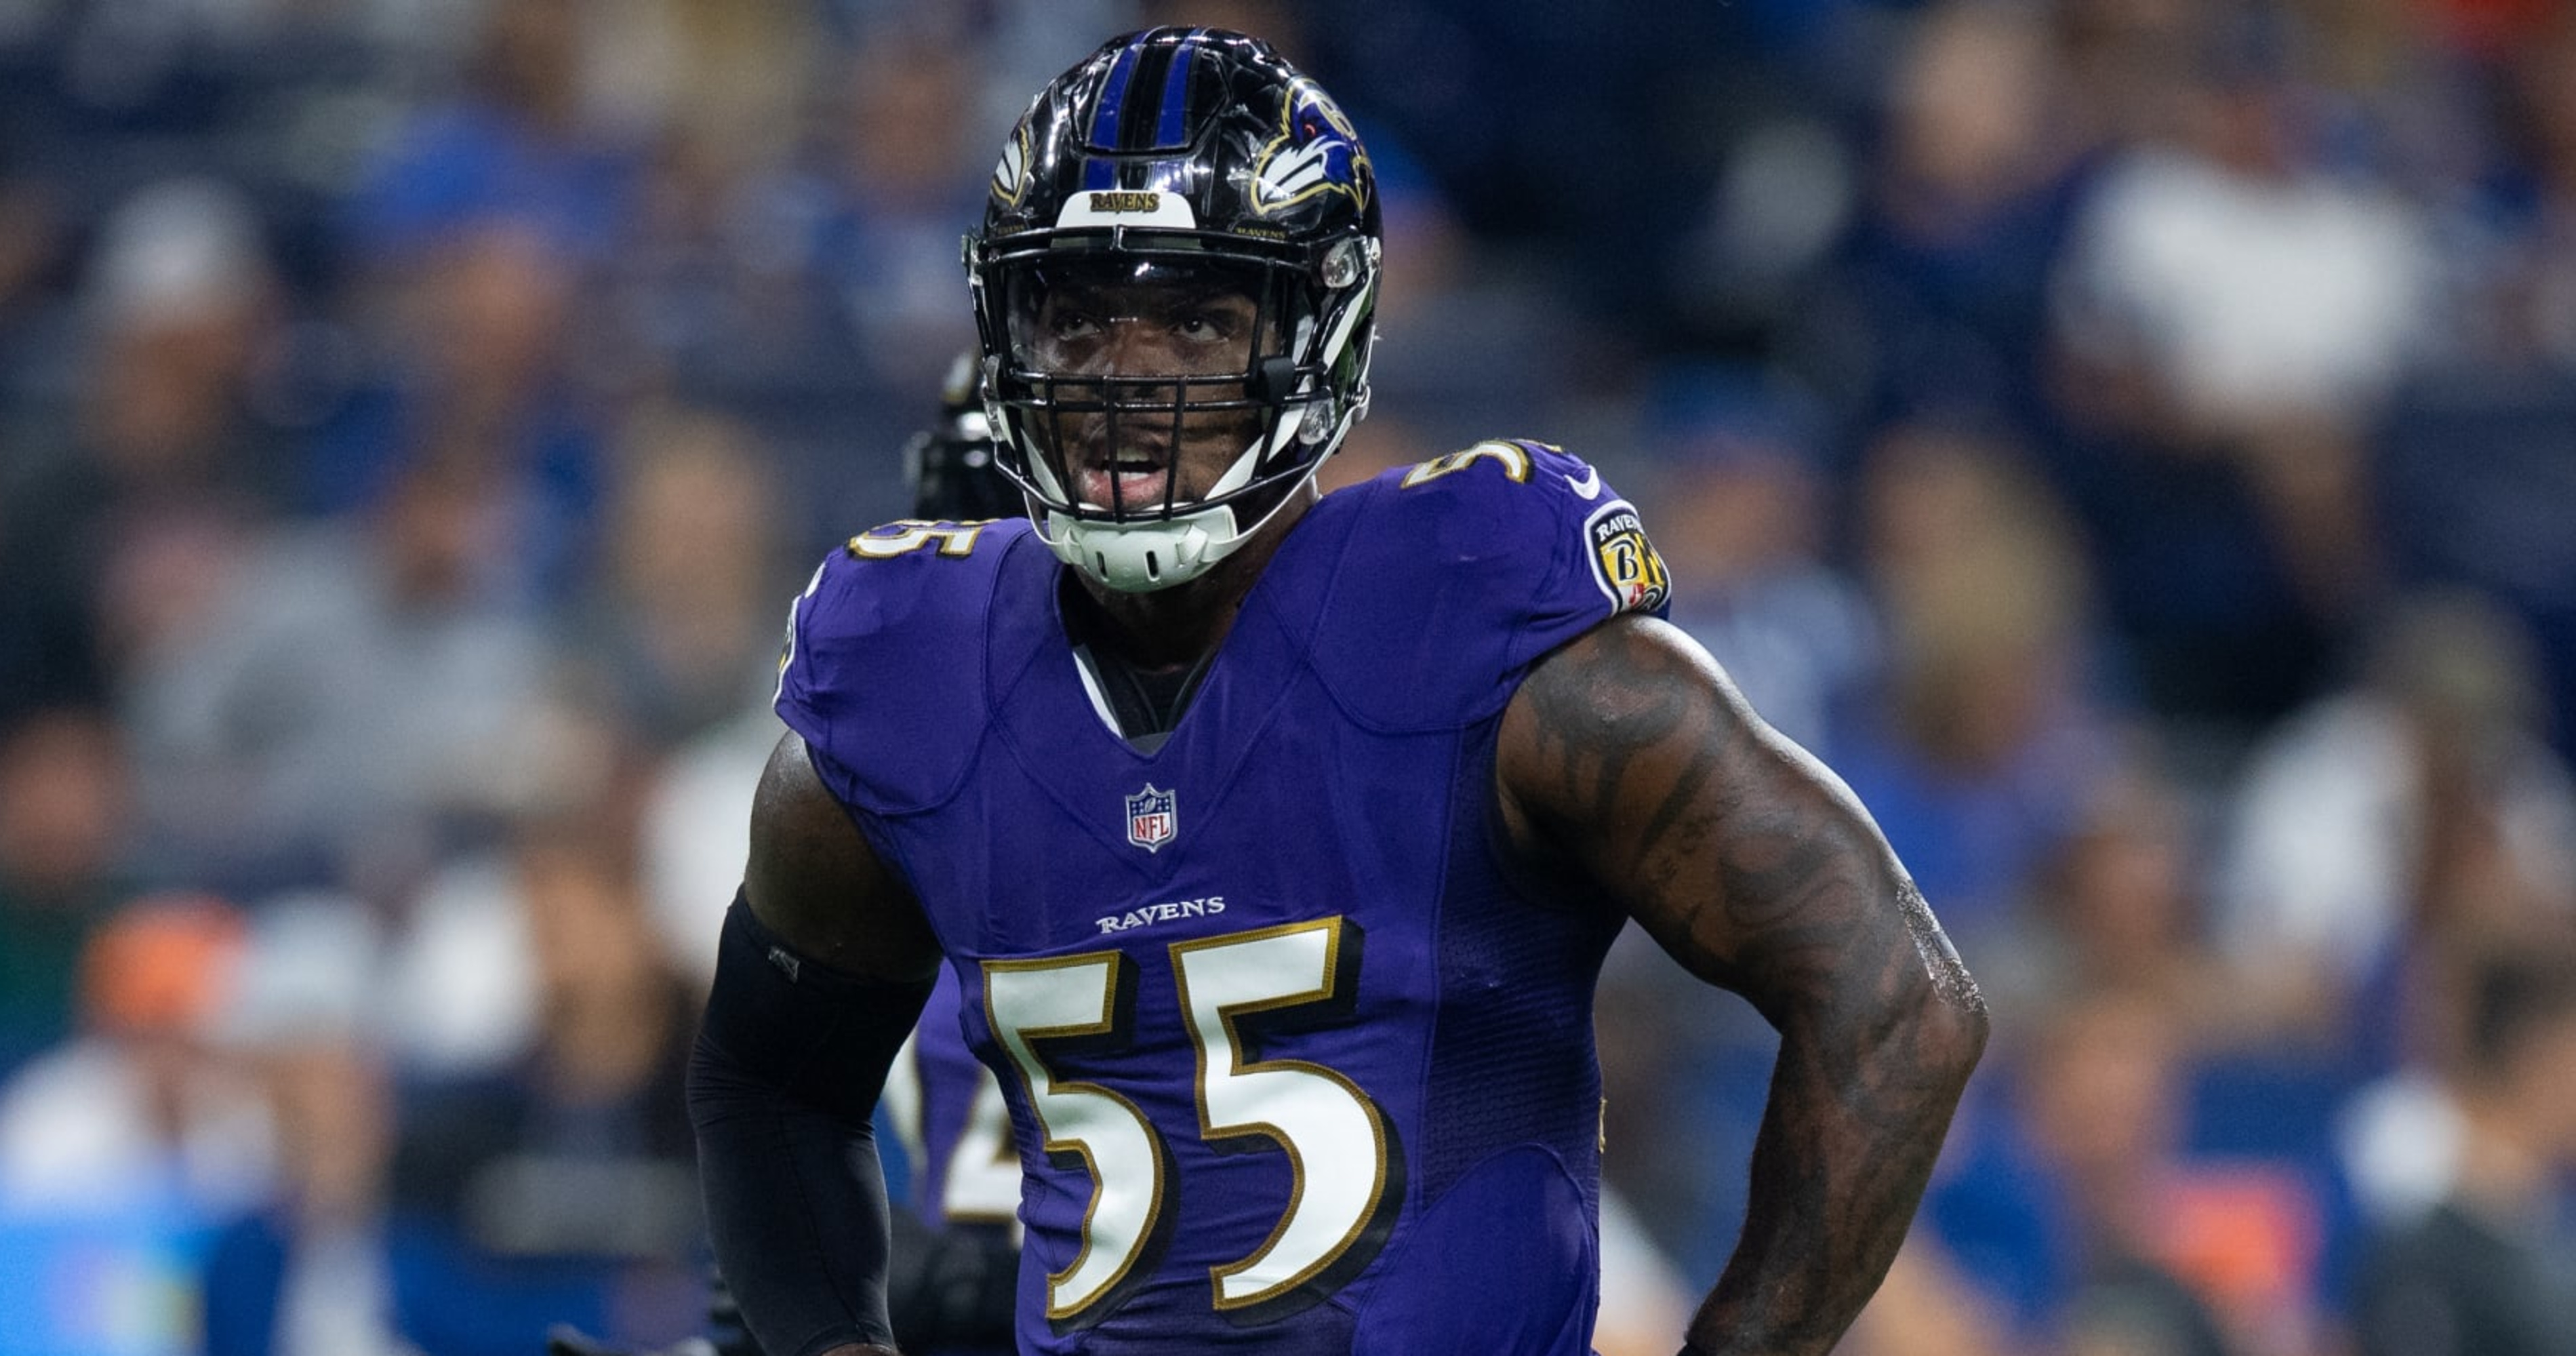 Ravens set to induct Terrell Suggs into their Ring of Honor - ESPN